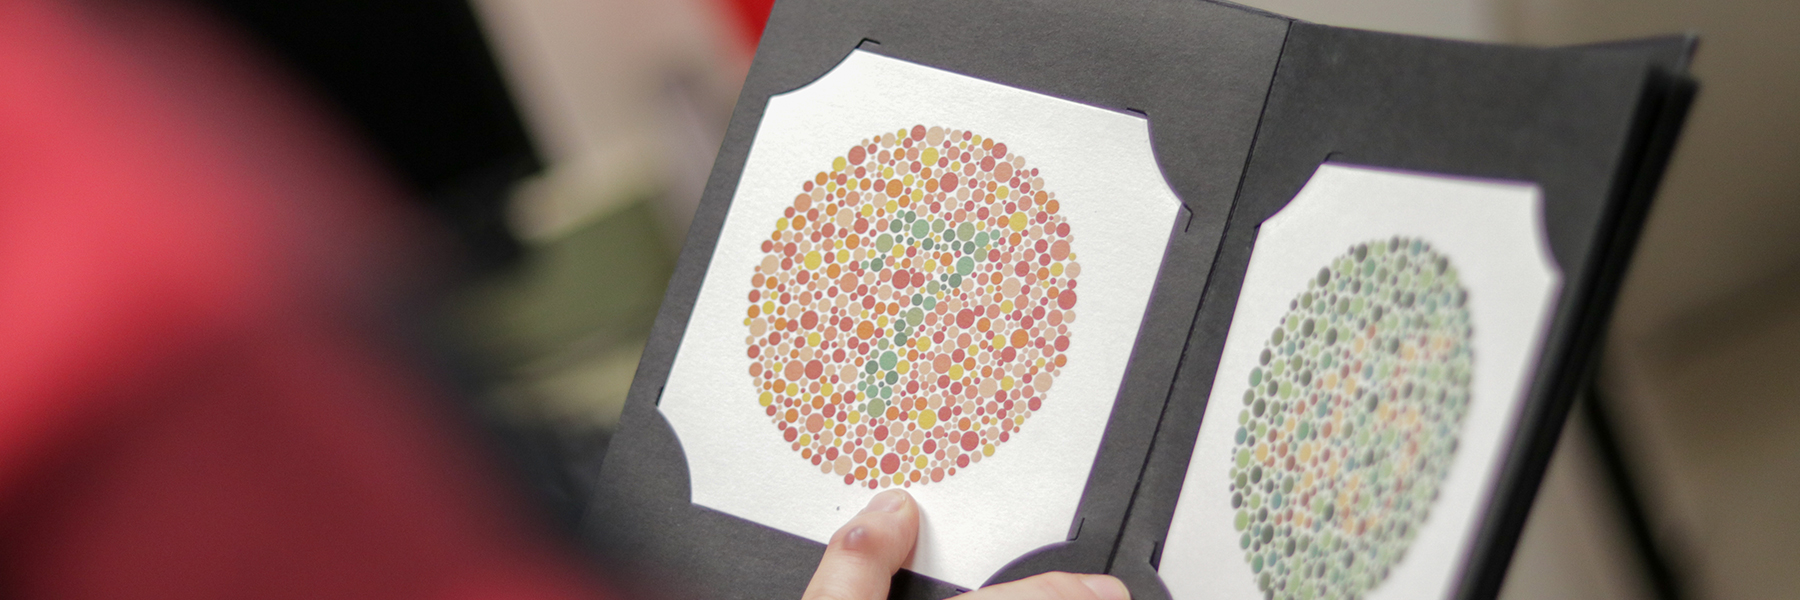 Close up view of a color blindness test.